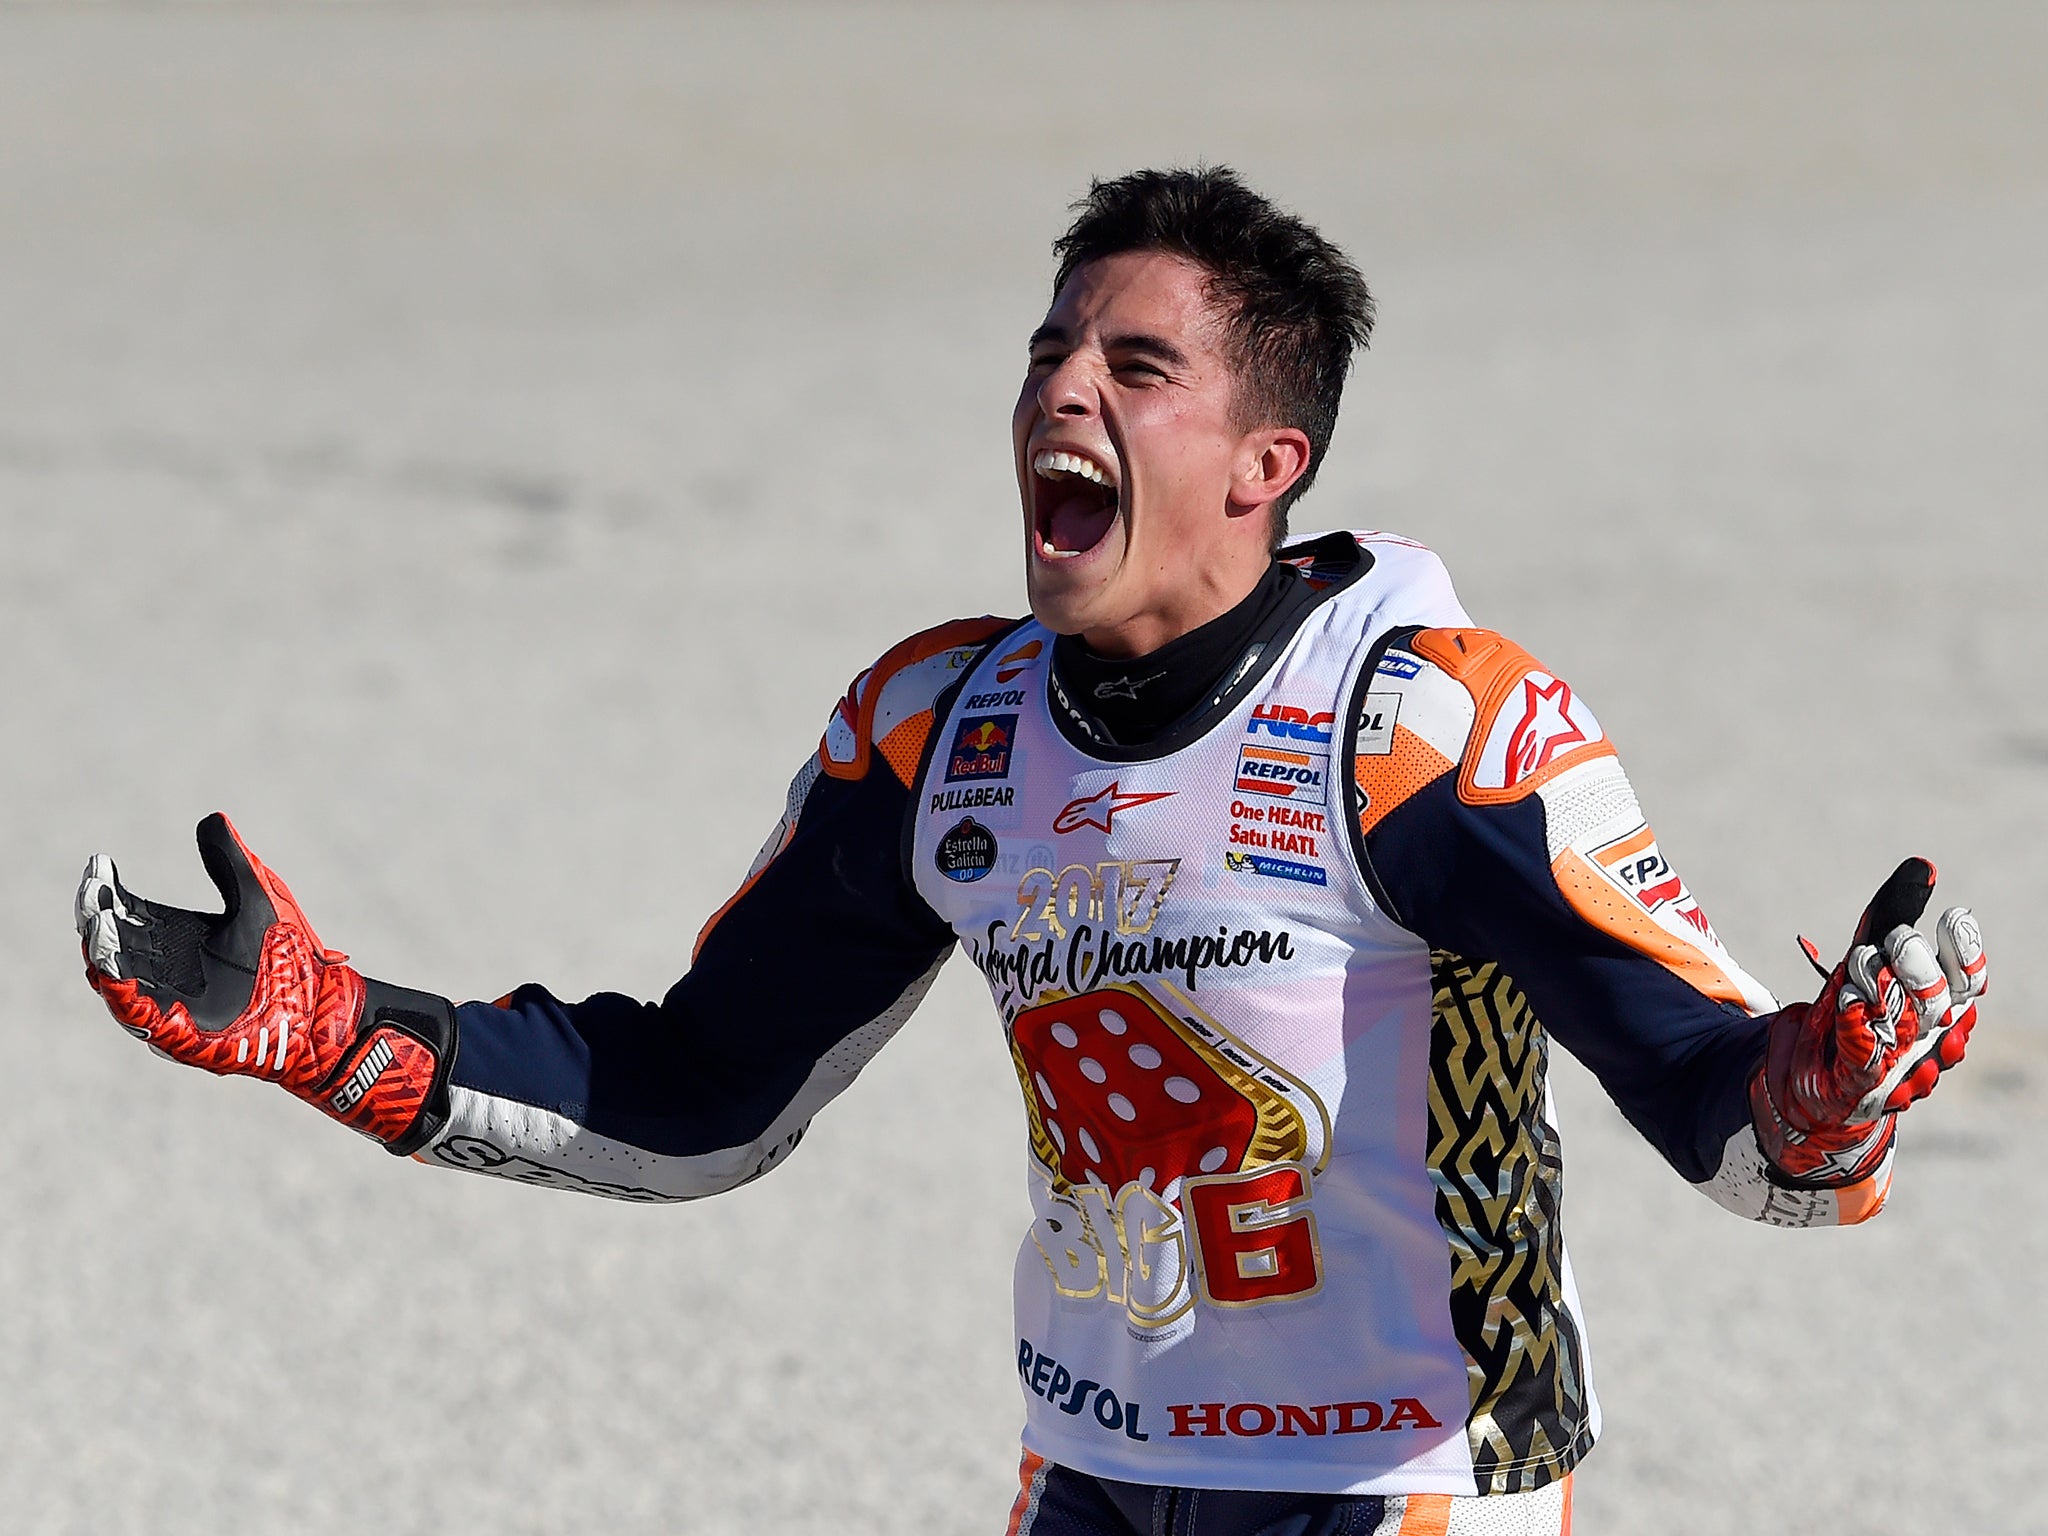 Marquez enjoyed his latest title victory on his slowing-down lap